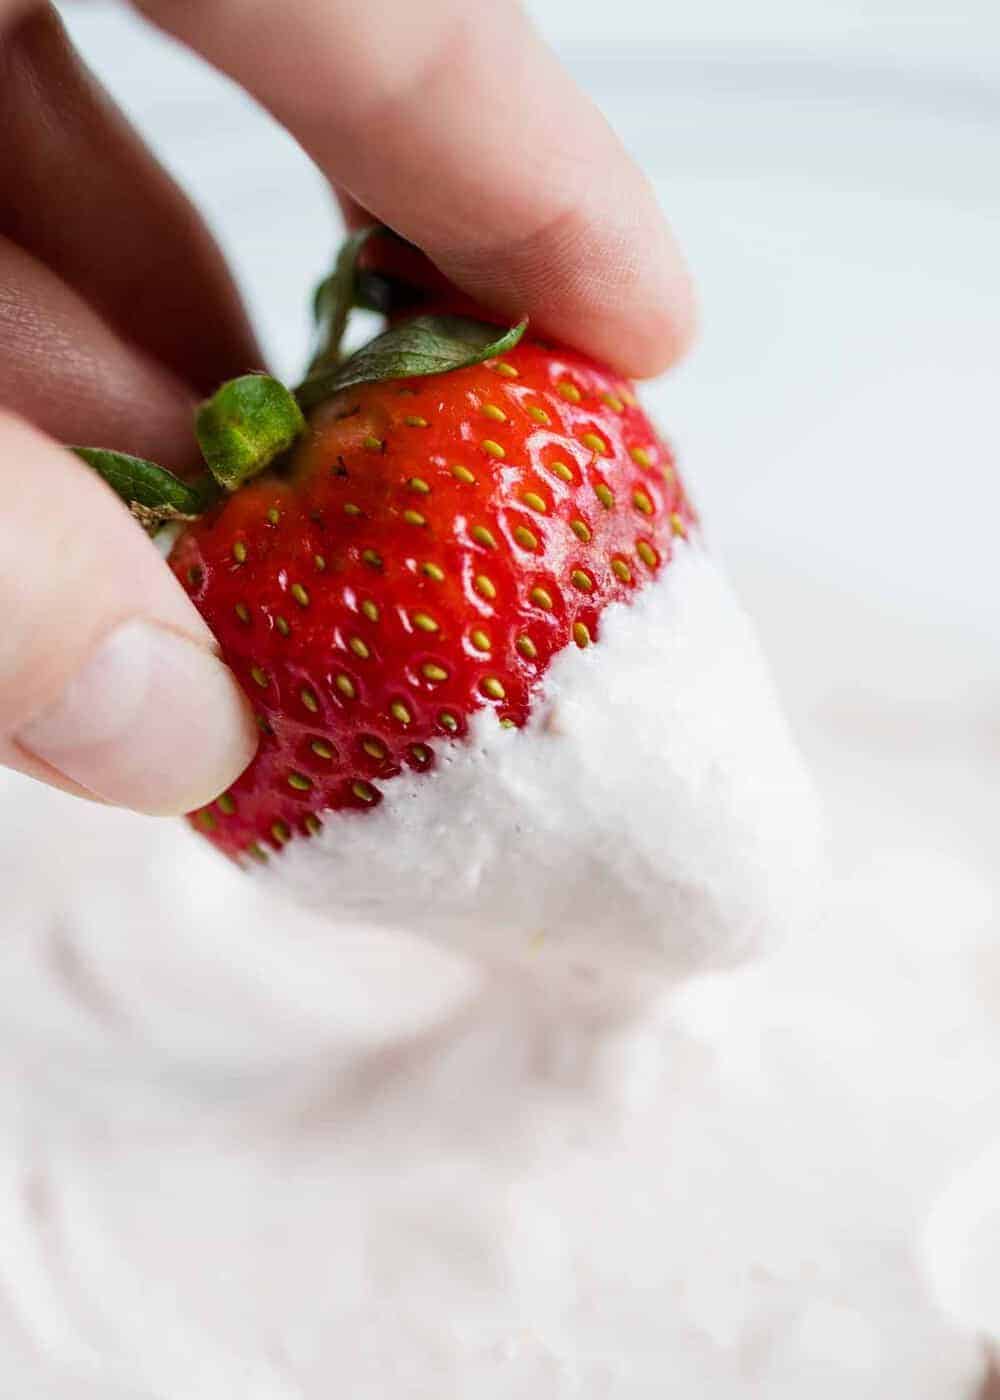 Dipping a fresh strawberry into strawberry fruit dip.